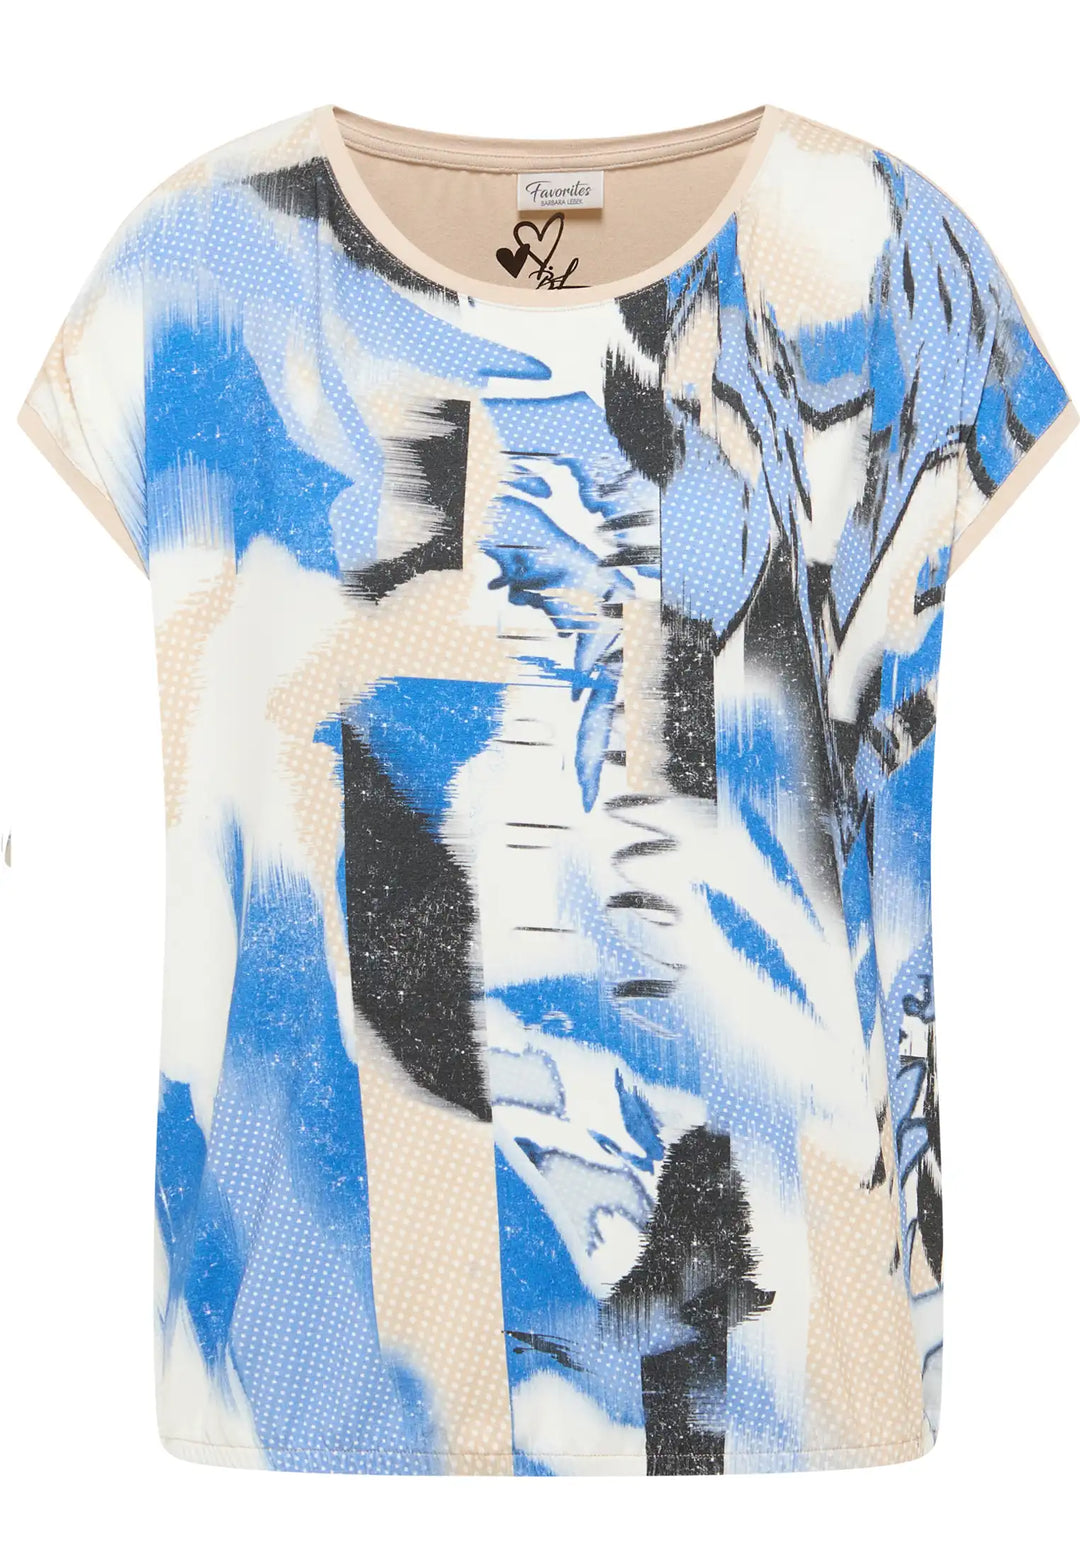 Stylish top with a dynamic abstract print in vibrant blue and white, featuring a comfortable round neckline and a relaxed fit for a casual yet chic look, style 55180042-210